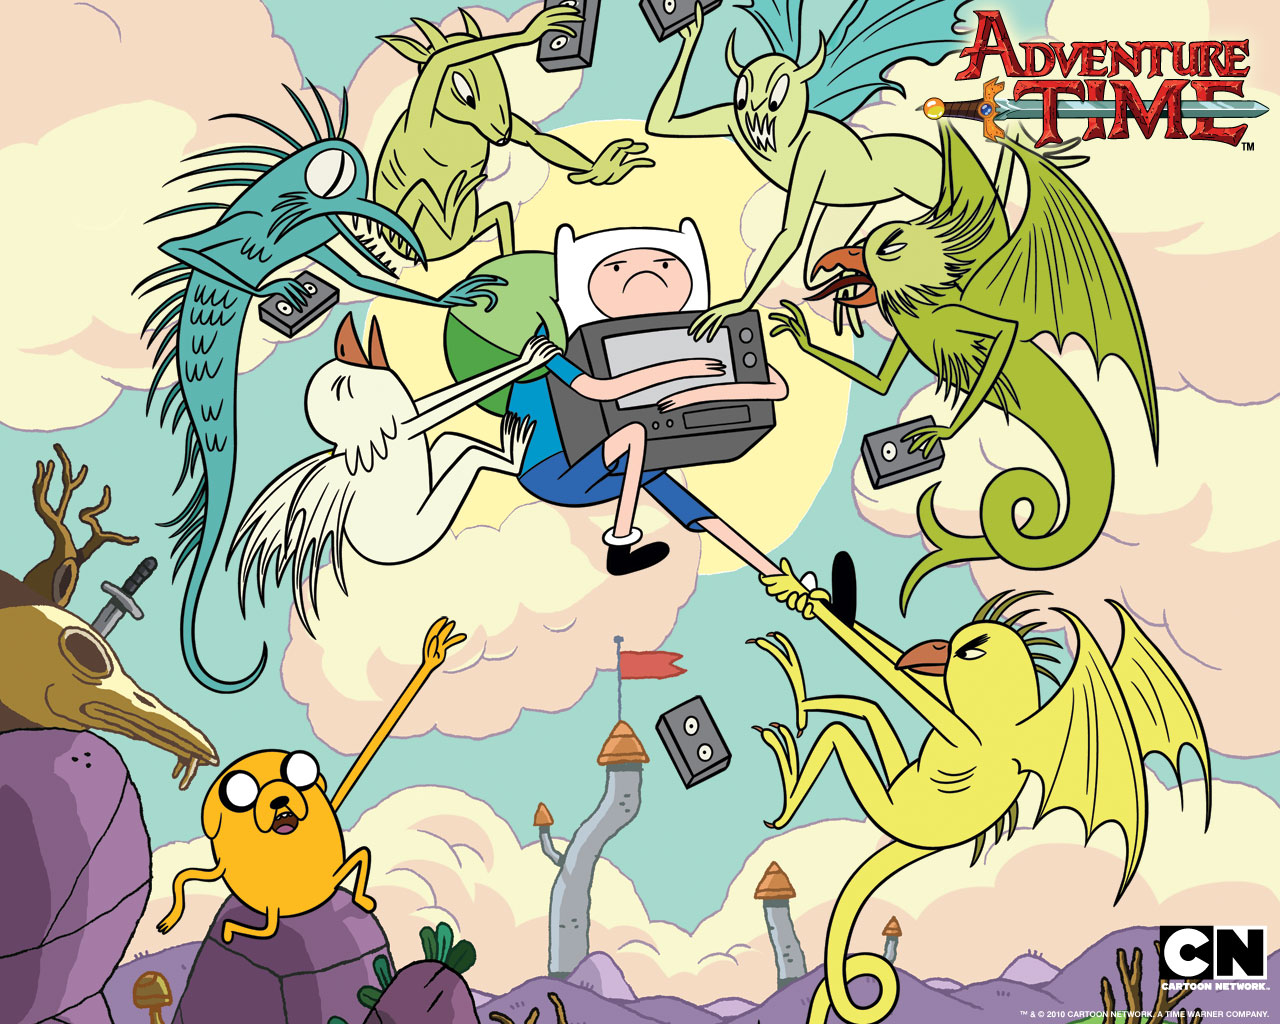 Download HQ kinopoisk.ru Adventure Time with Finn 26 2338 3B Jake 2040782 w 1280 Adventure Time with Finn & Jake wallpaper / 1280x1024